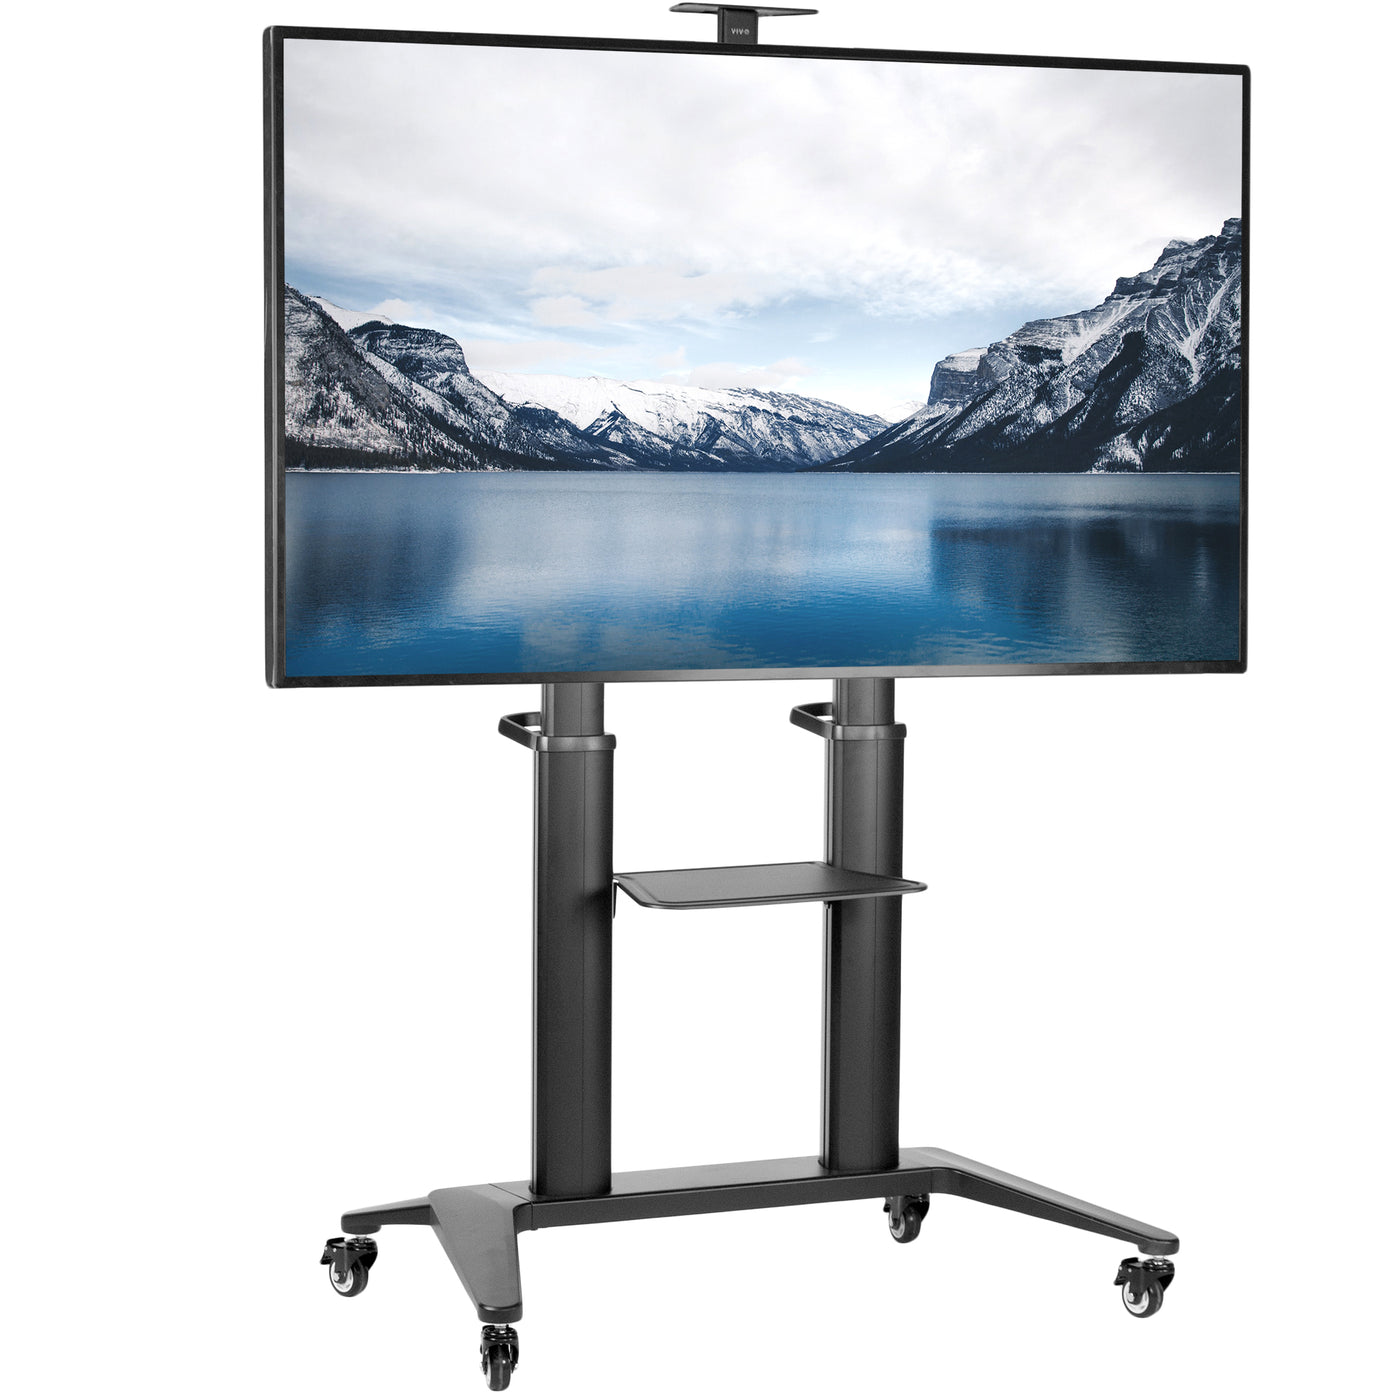 Large mobile TV stand from VIVO.